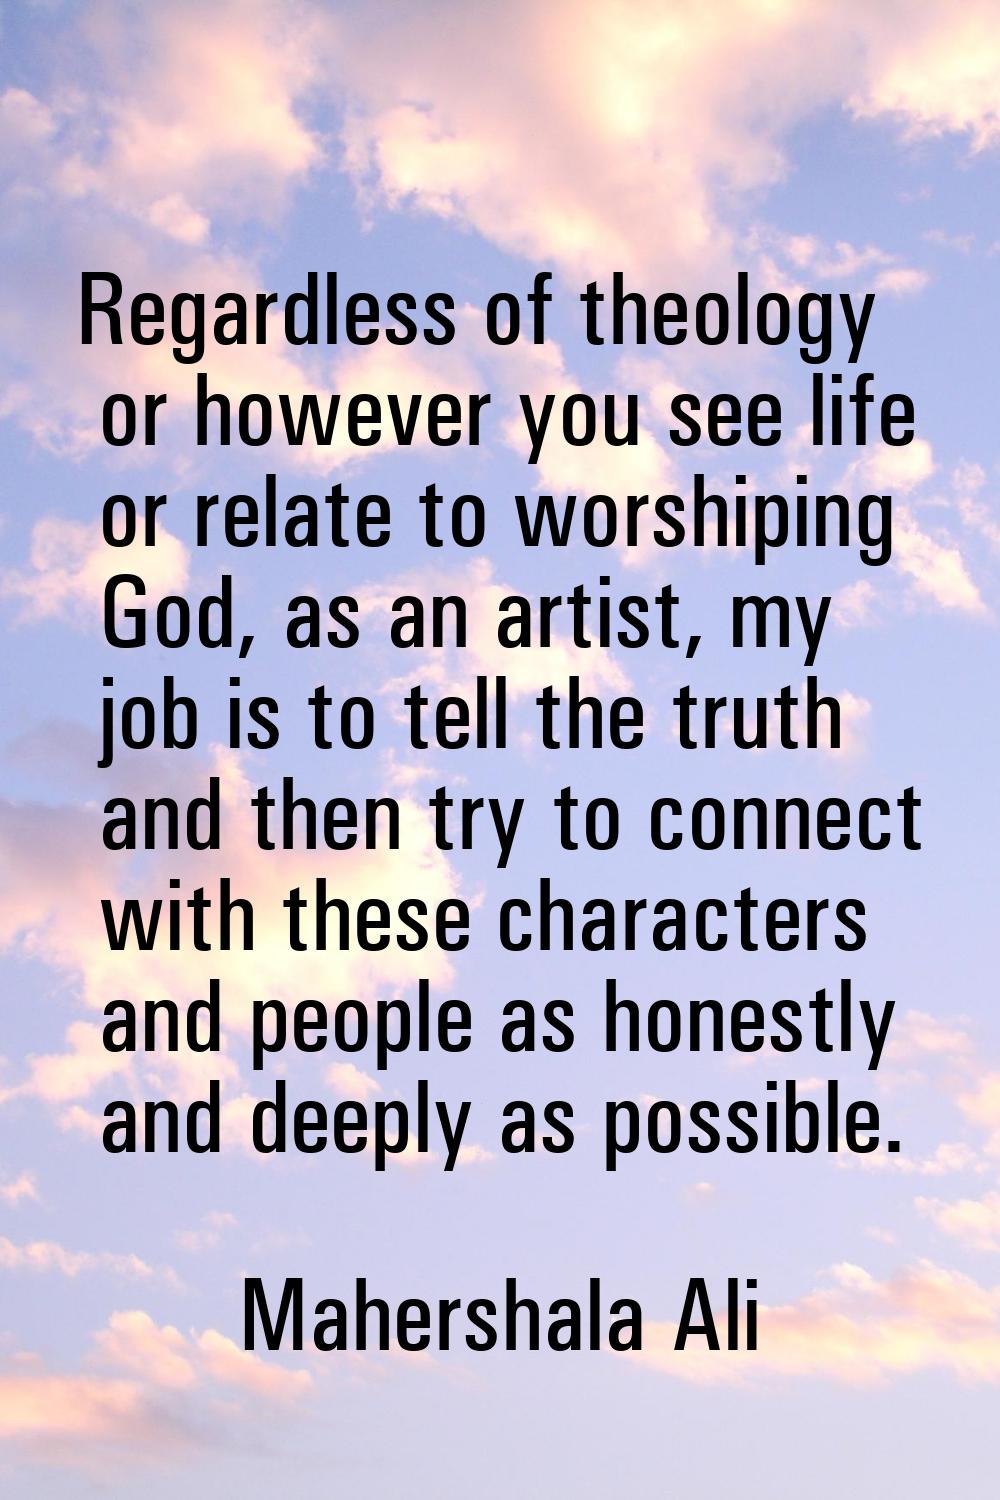 Regardless of theology or however you see life or relate to worshiping God, as an artist, my job is